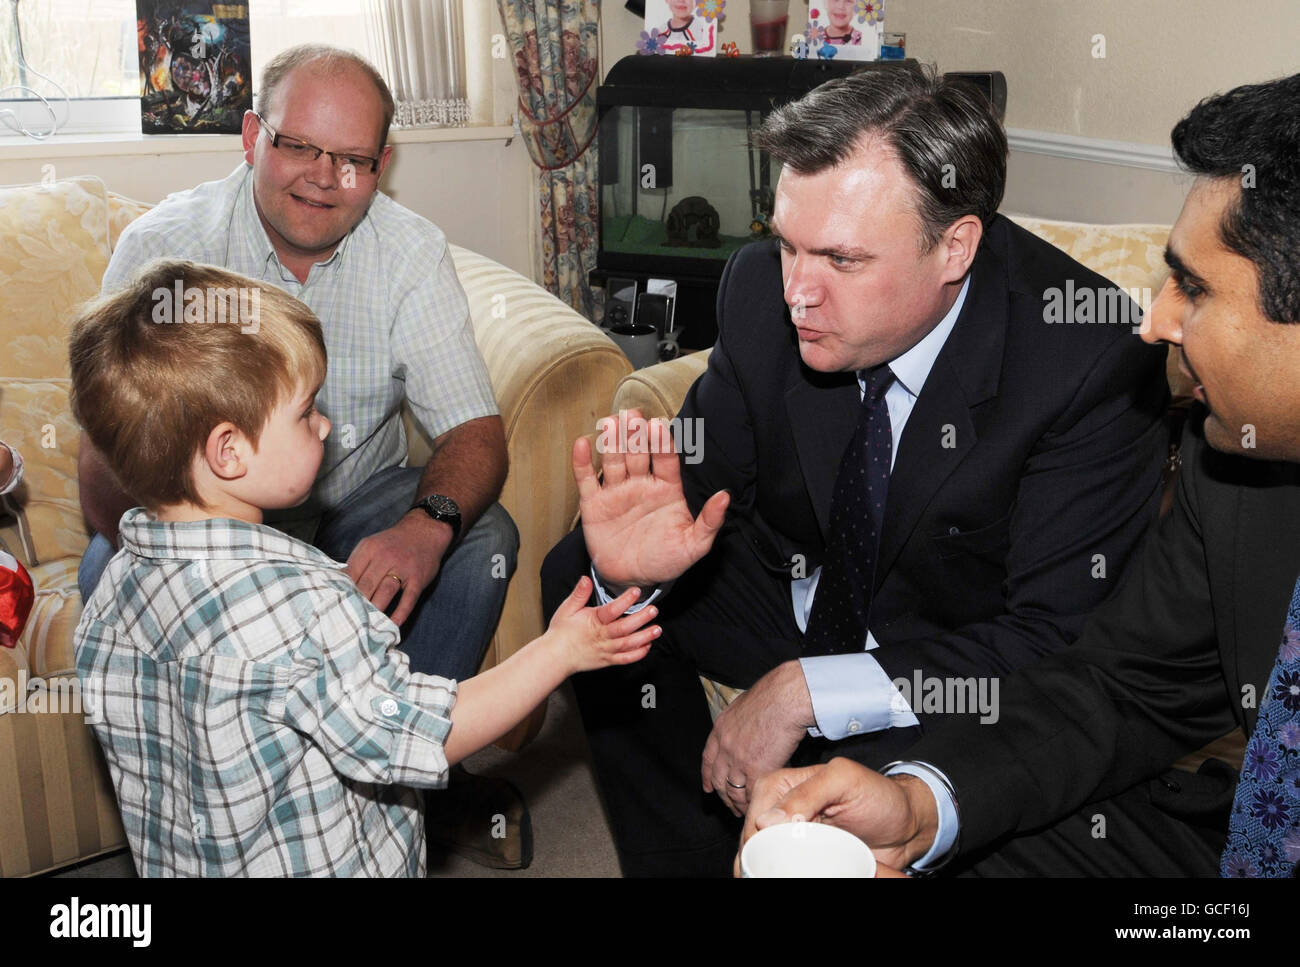 Ed Balls, Secretary of State for Children, Schools and Families meets William Chatterton, 3, as his father Chris Chatterton (left) looks on. Mr Balls was attending a house meeting in Gloucester with local parents and children who have benefited from Labour's Sure Start Children's Centres. Stock Photo